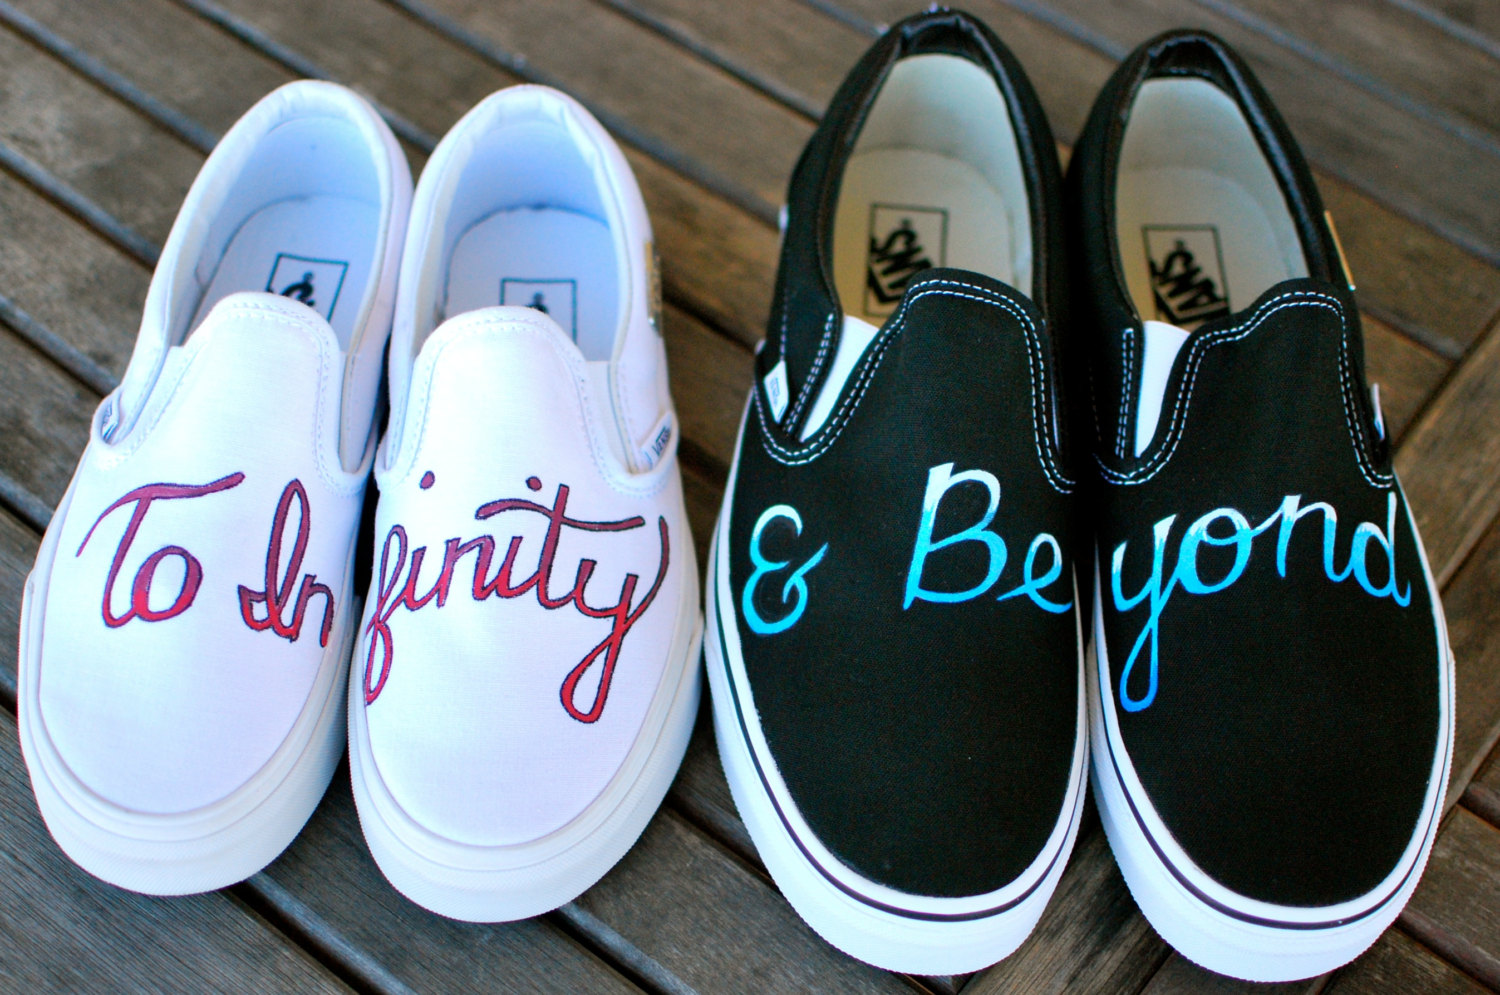 Couples inserted quotes on their simple shoes.